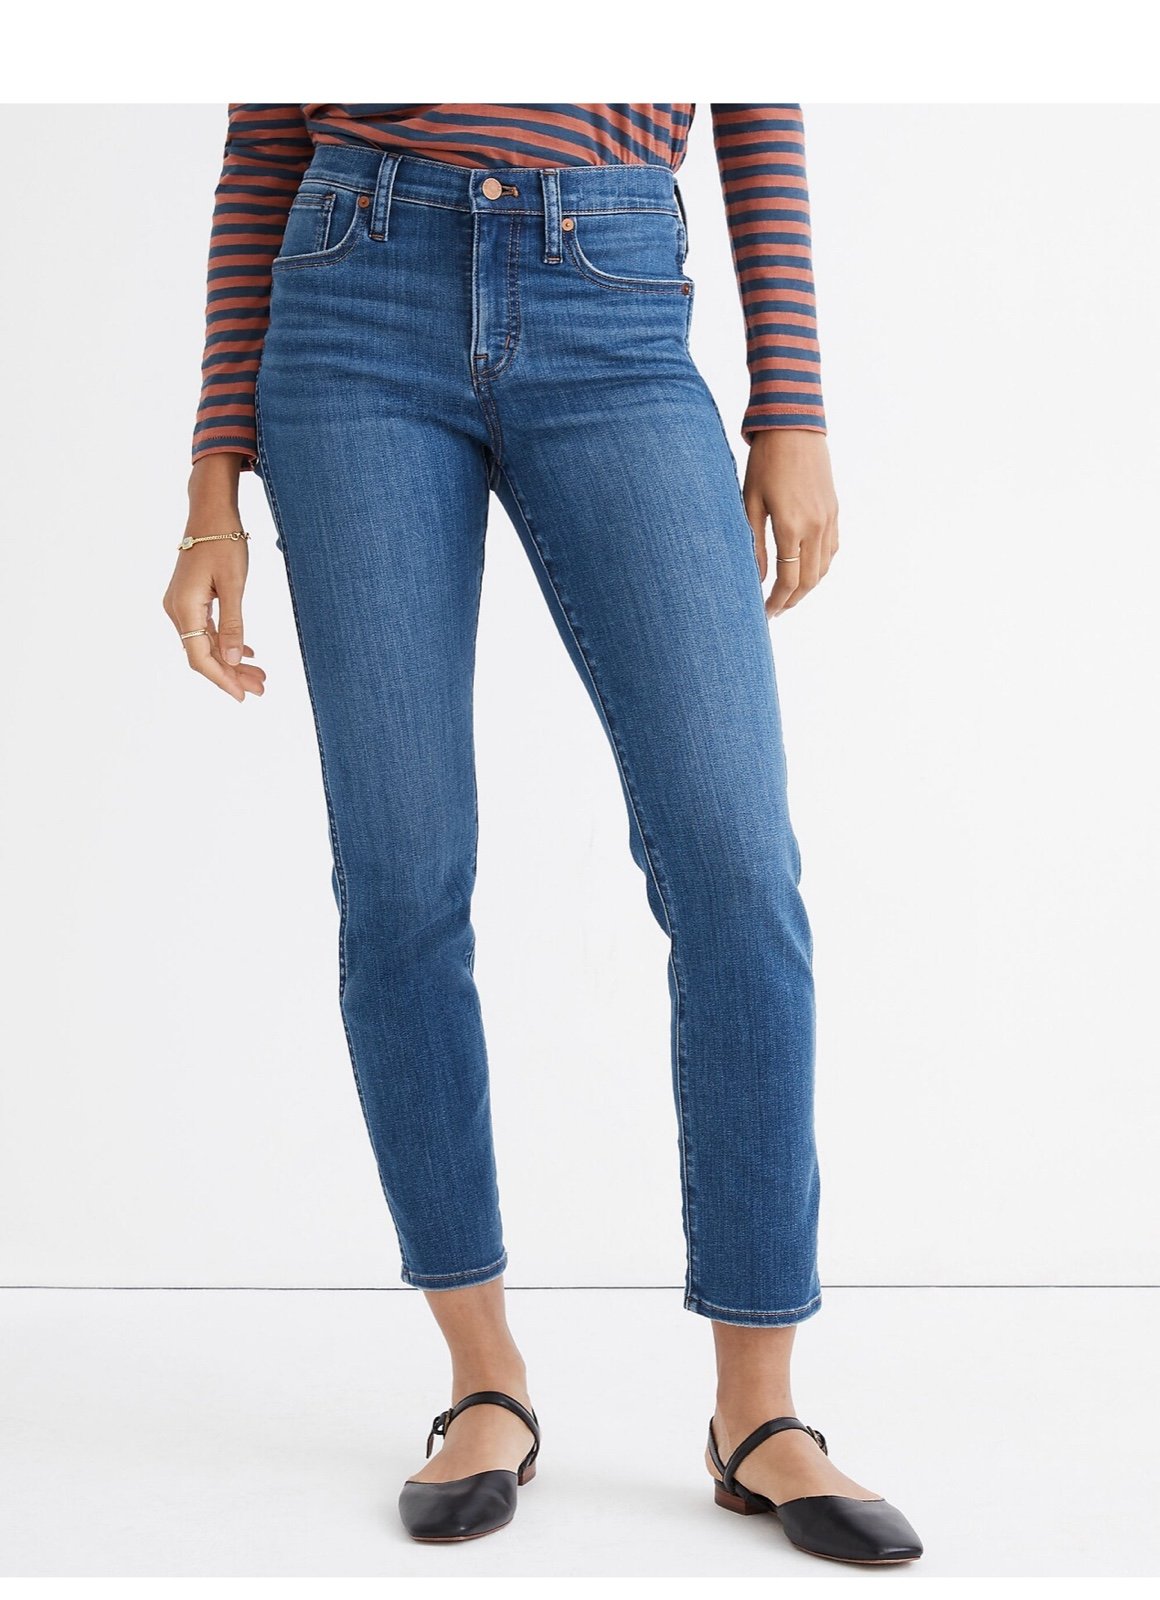 Simple NWT Madewell mid rise stovepipe Jean 25 GJS3QwDC